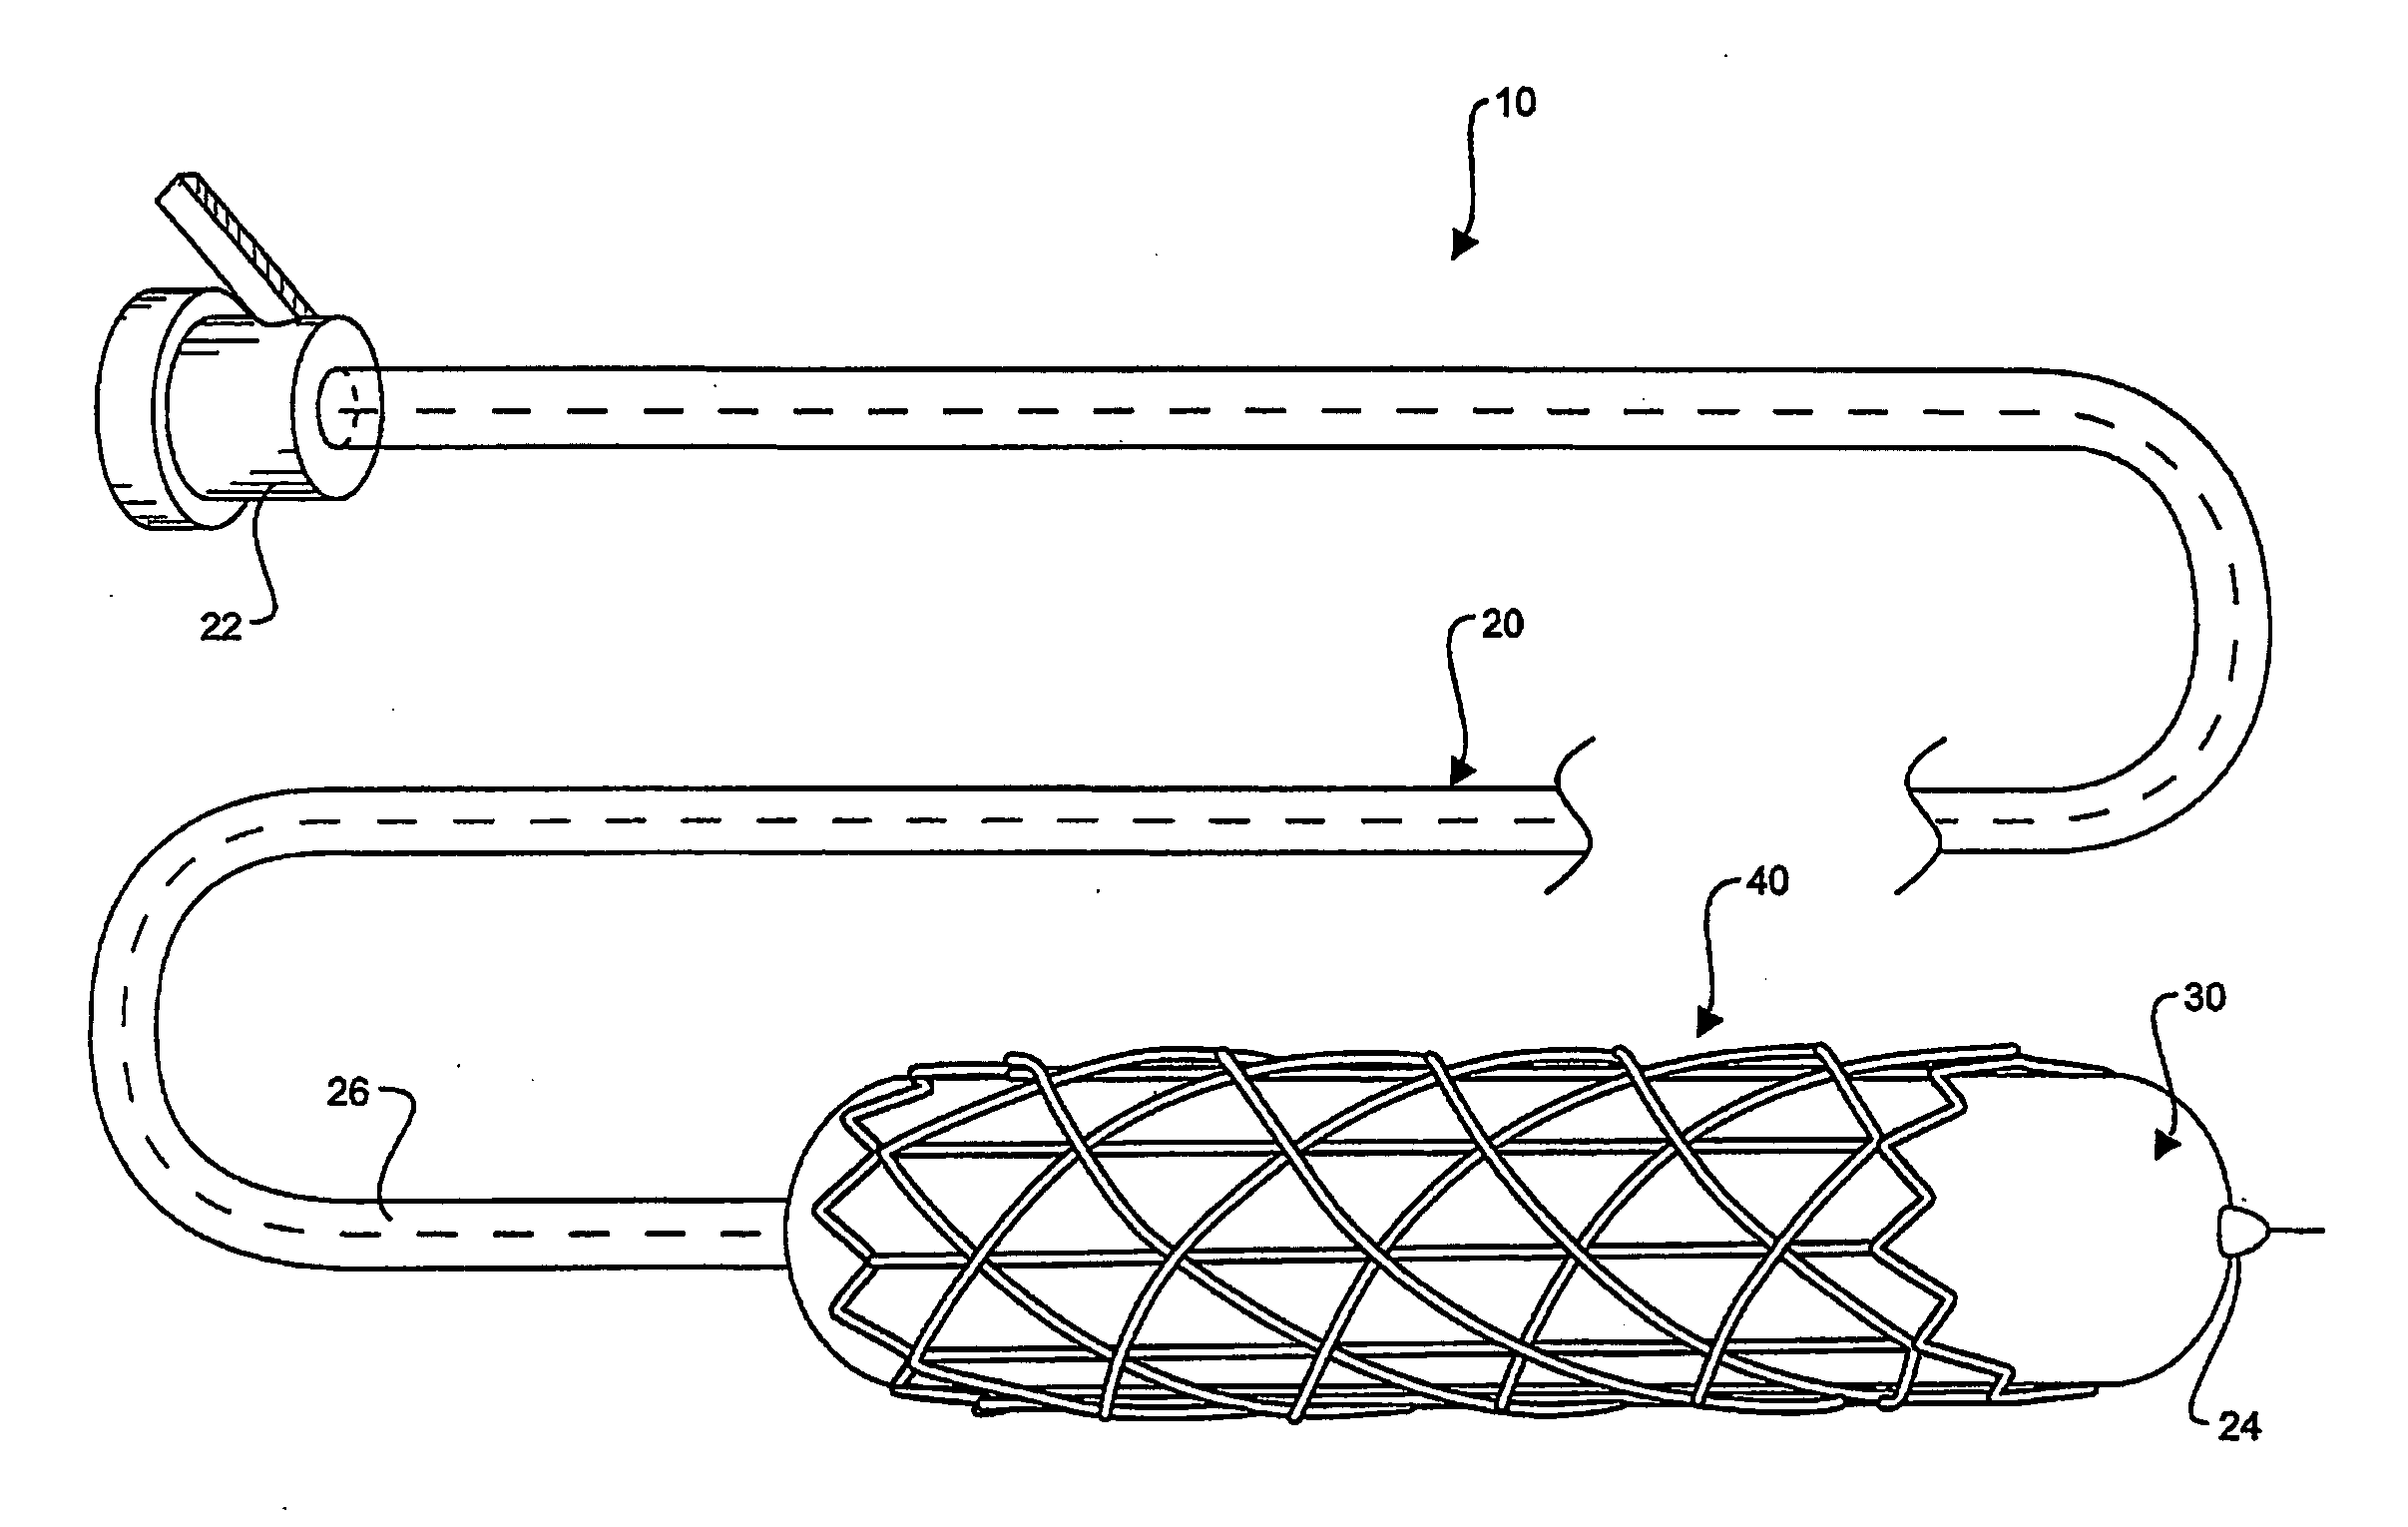 Hybrid Biodegradable/Non-Biodegradable Stent, Delivery System and Method of Treating a Vascular Condition